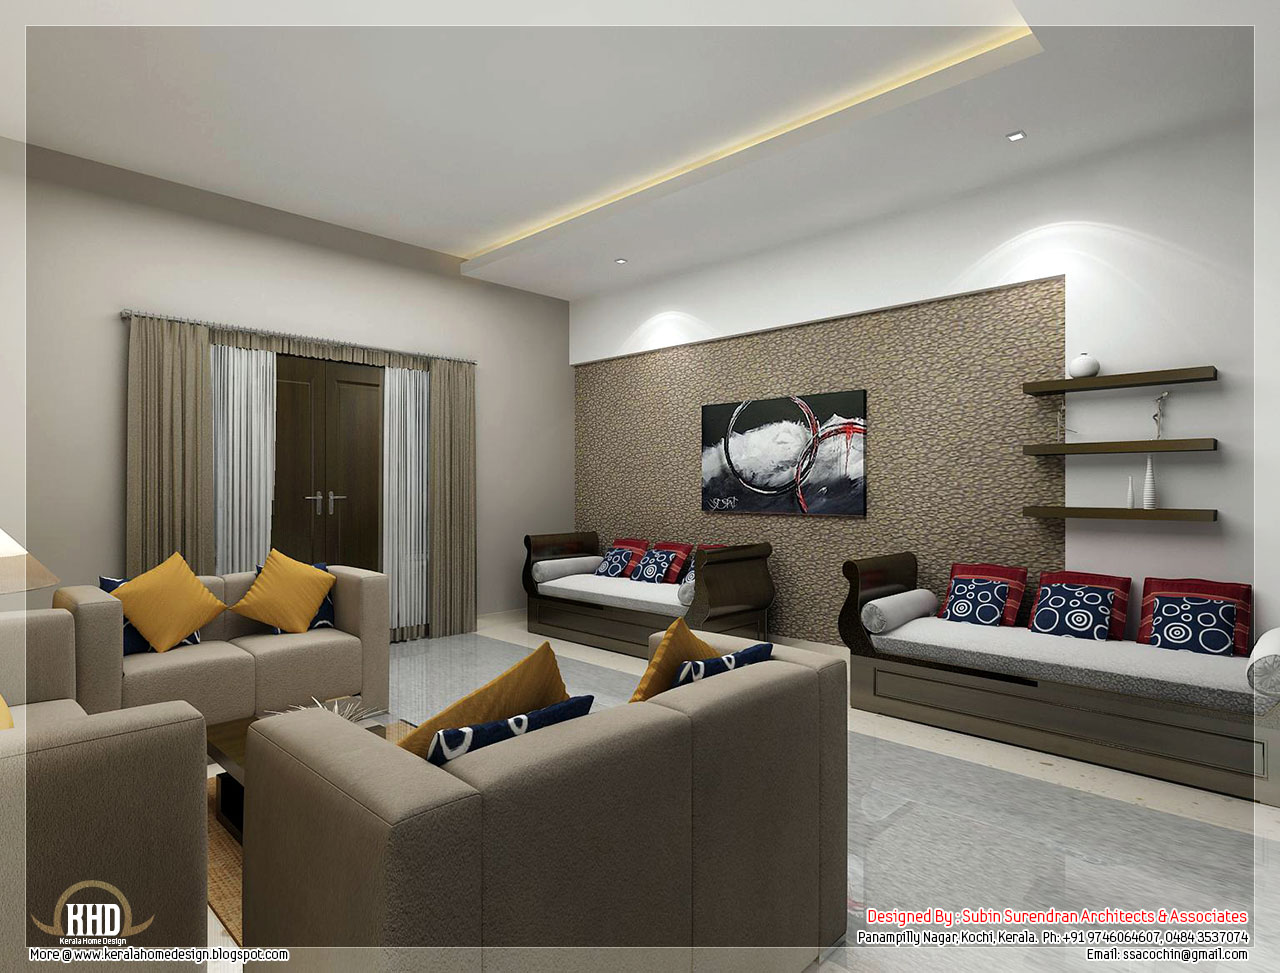 Awesome 3D interior renderings - Kerala home design and ...